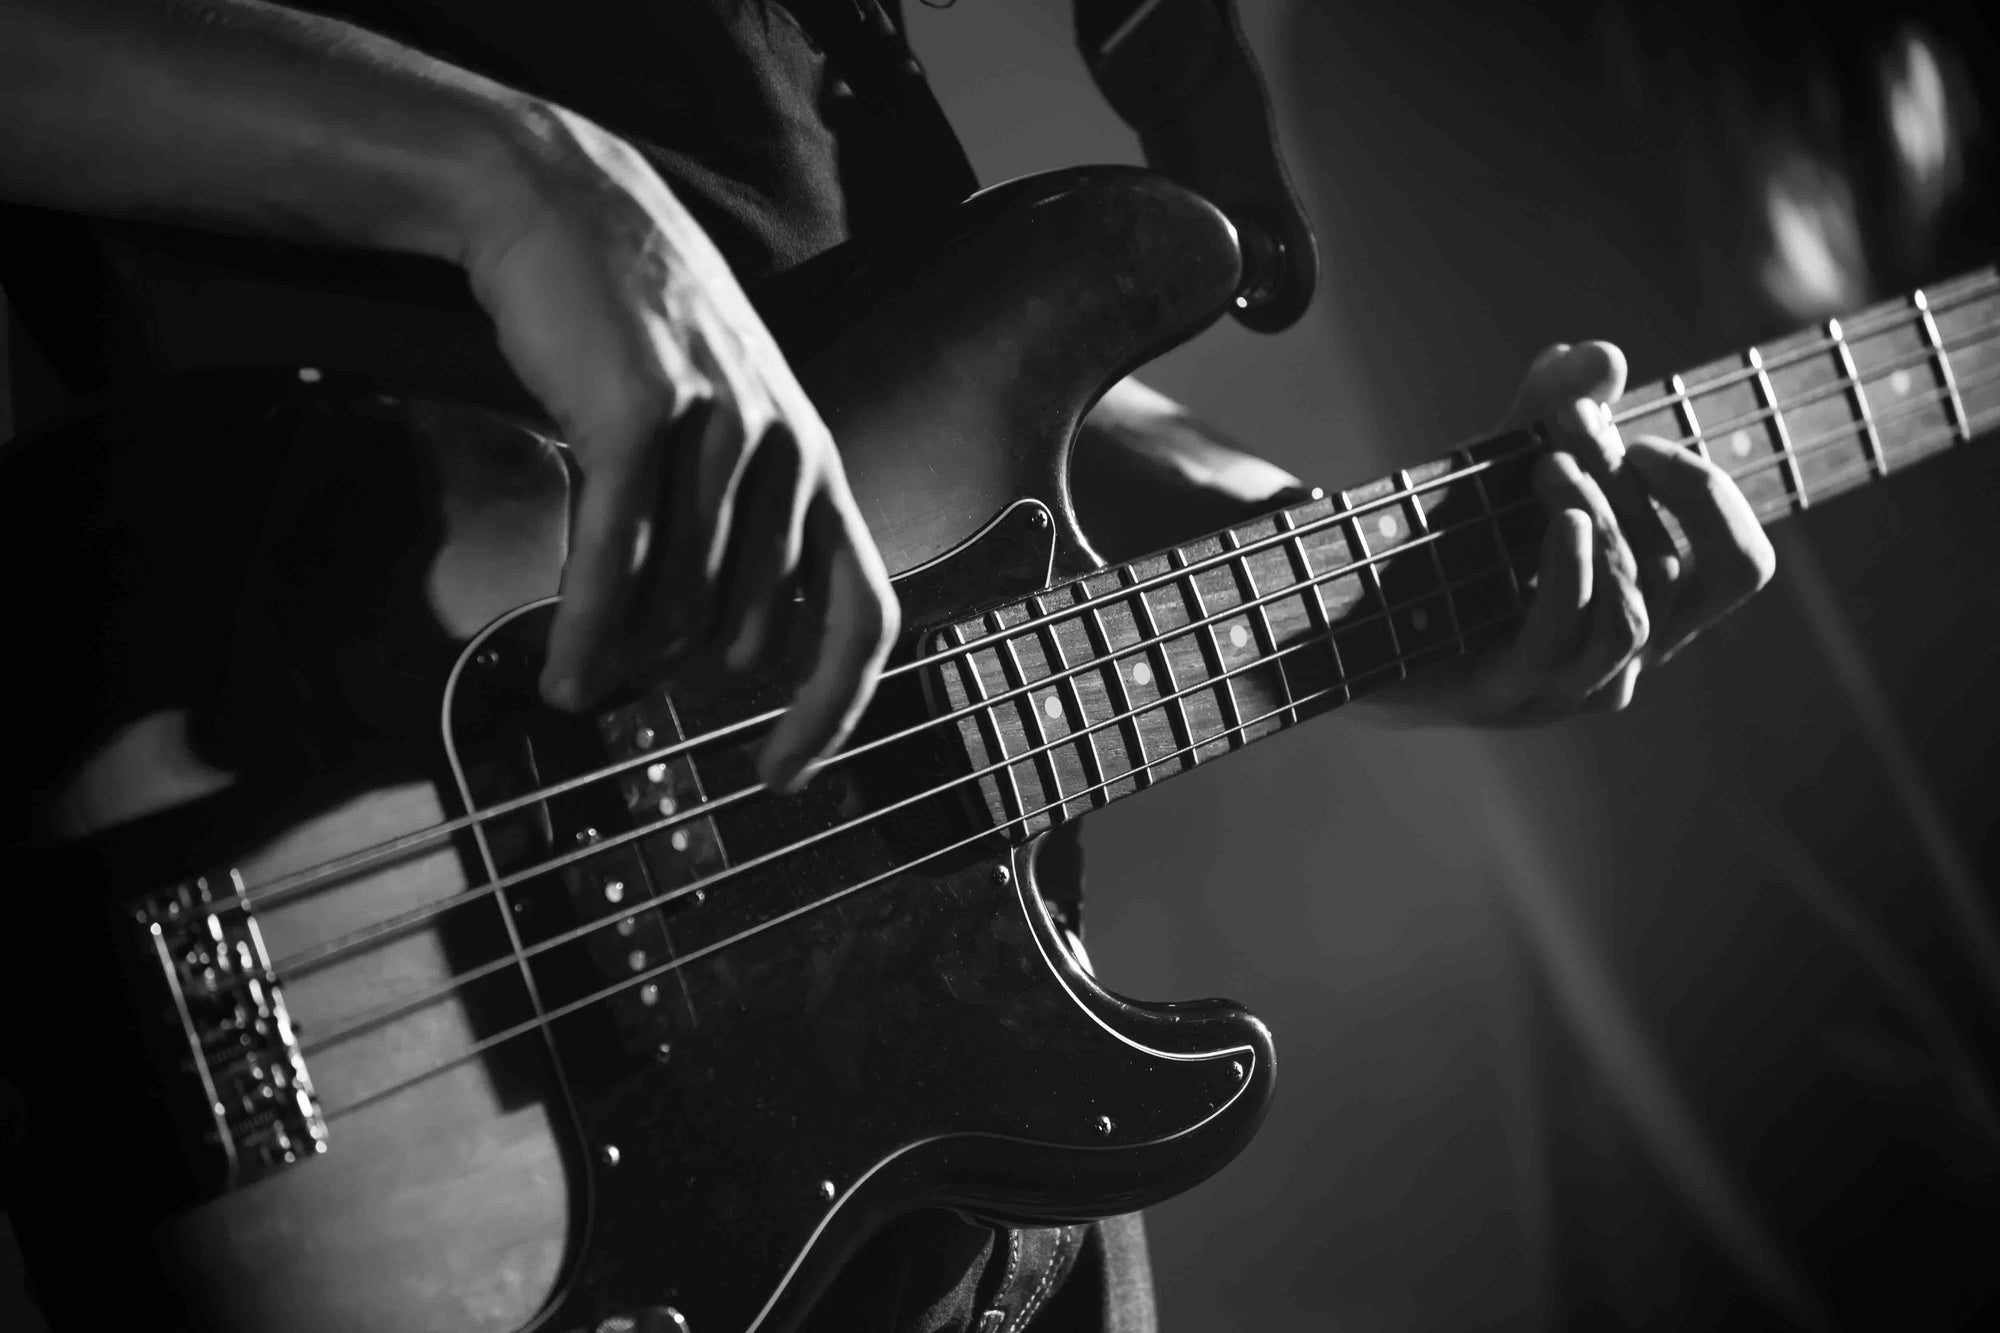 Bass Distortion and DI: Making it Work